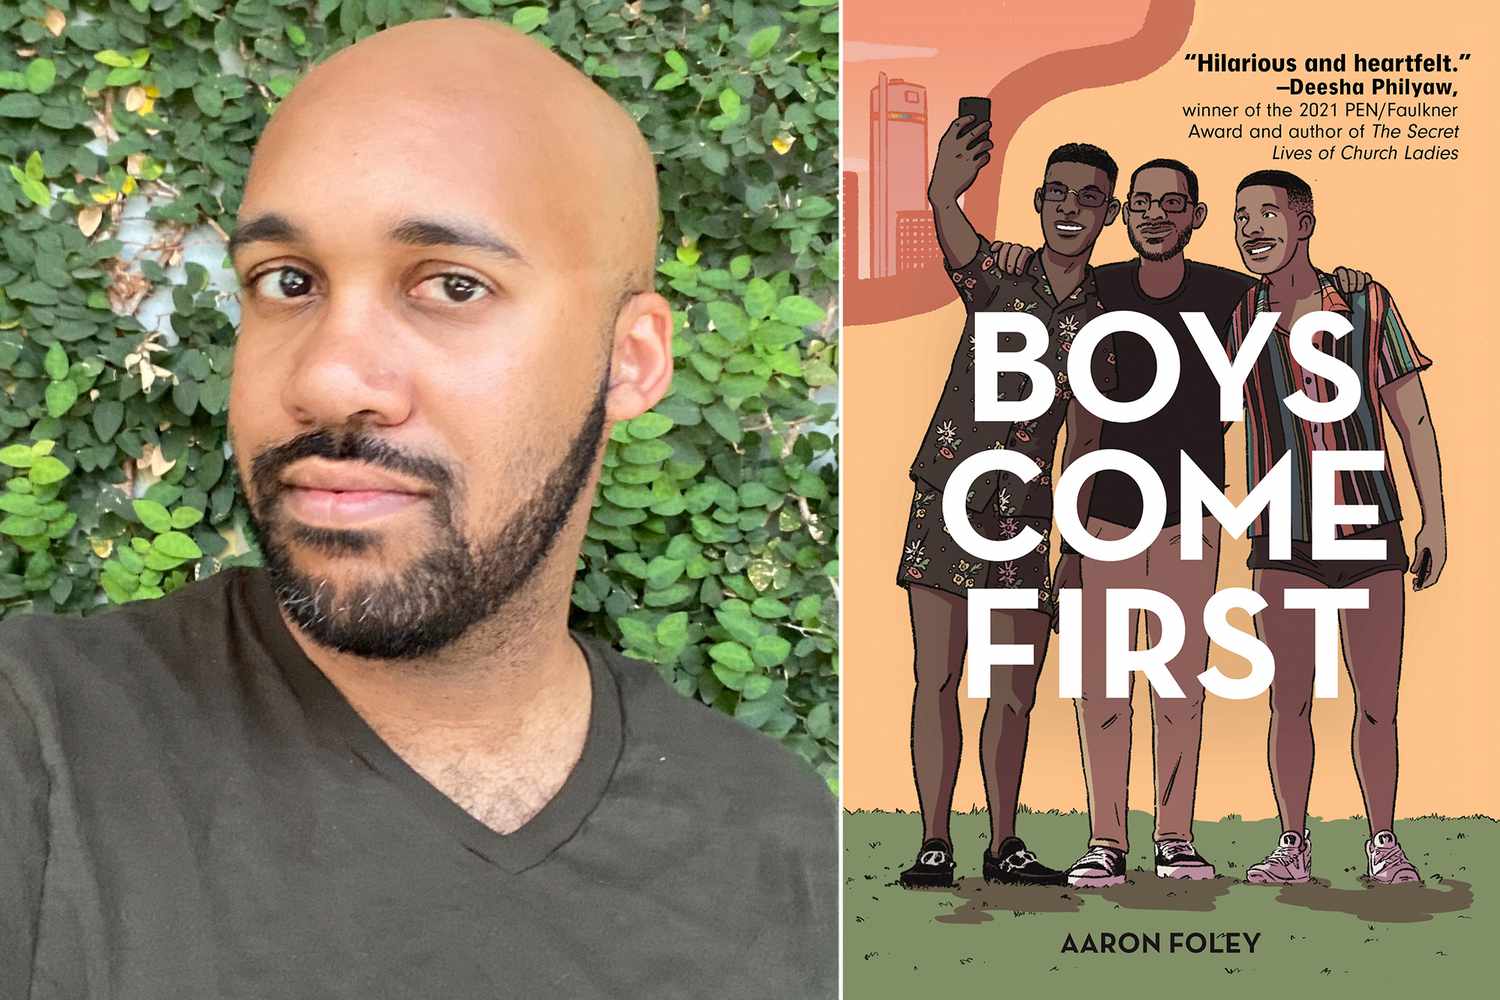 Aaron Foley is the author of 'Boys Come First'